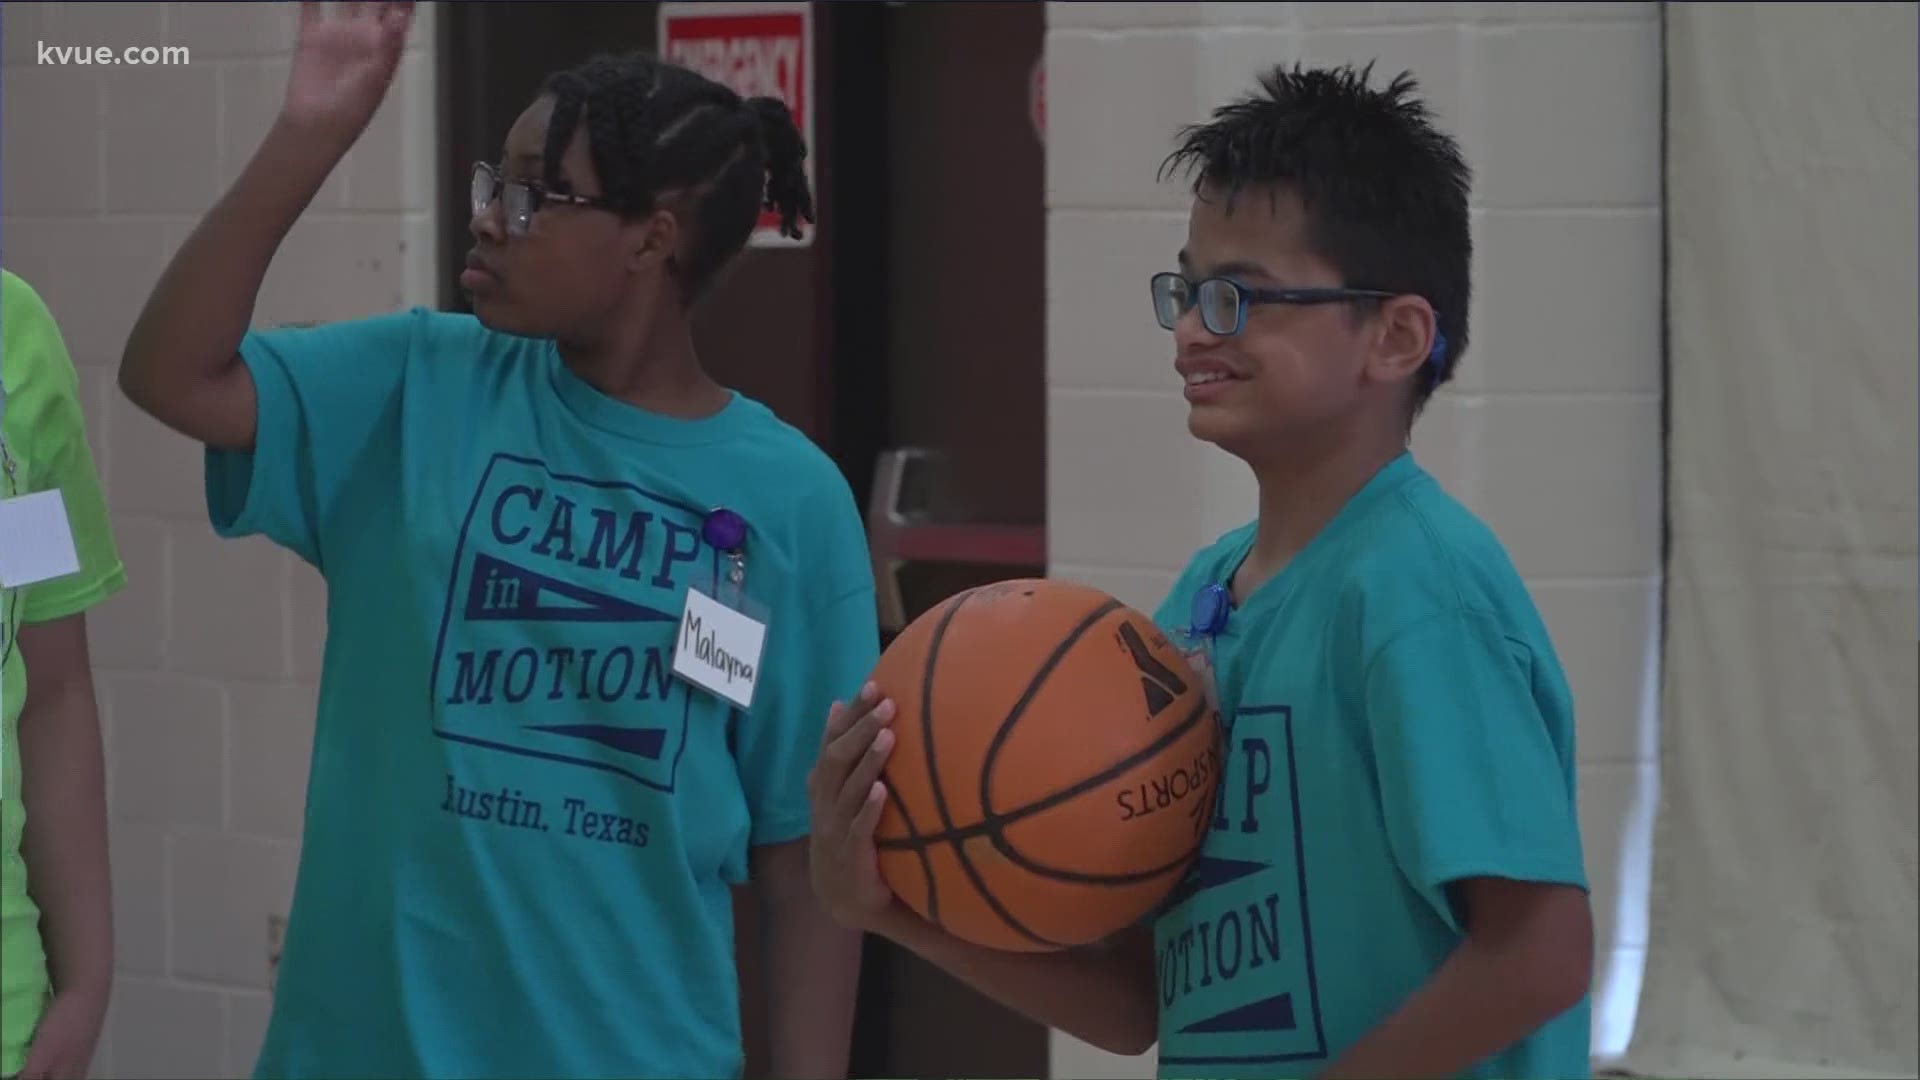 Camp in Motion creates an opportunity for kids with cerebral palsy to have a traditional summer camp experience.